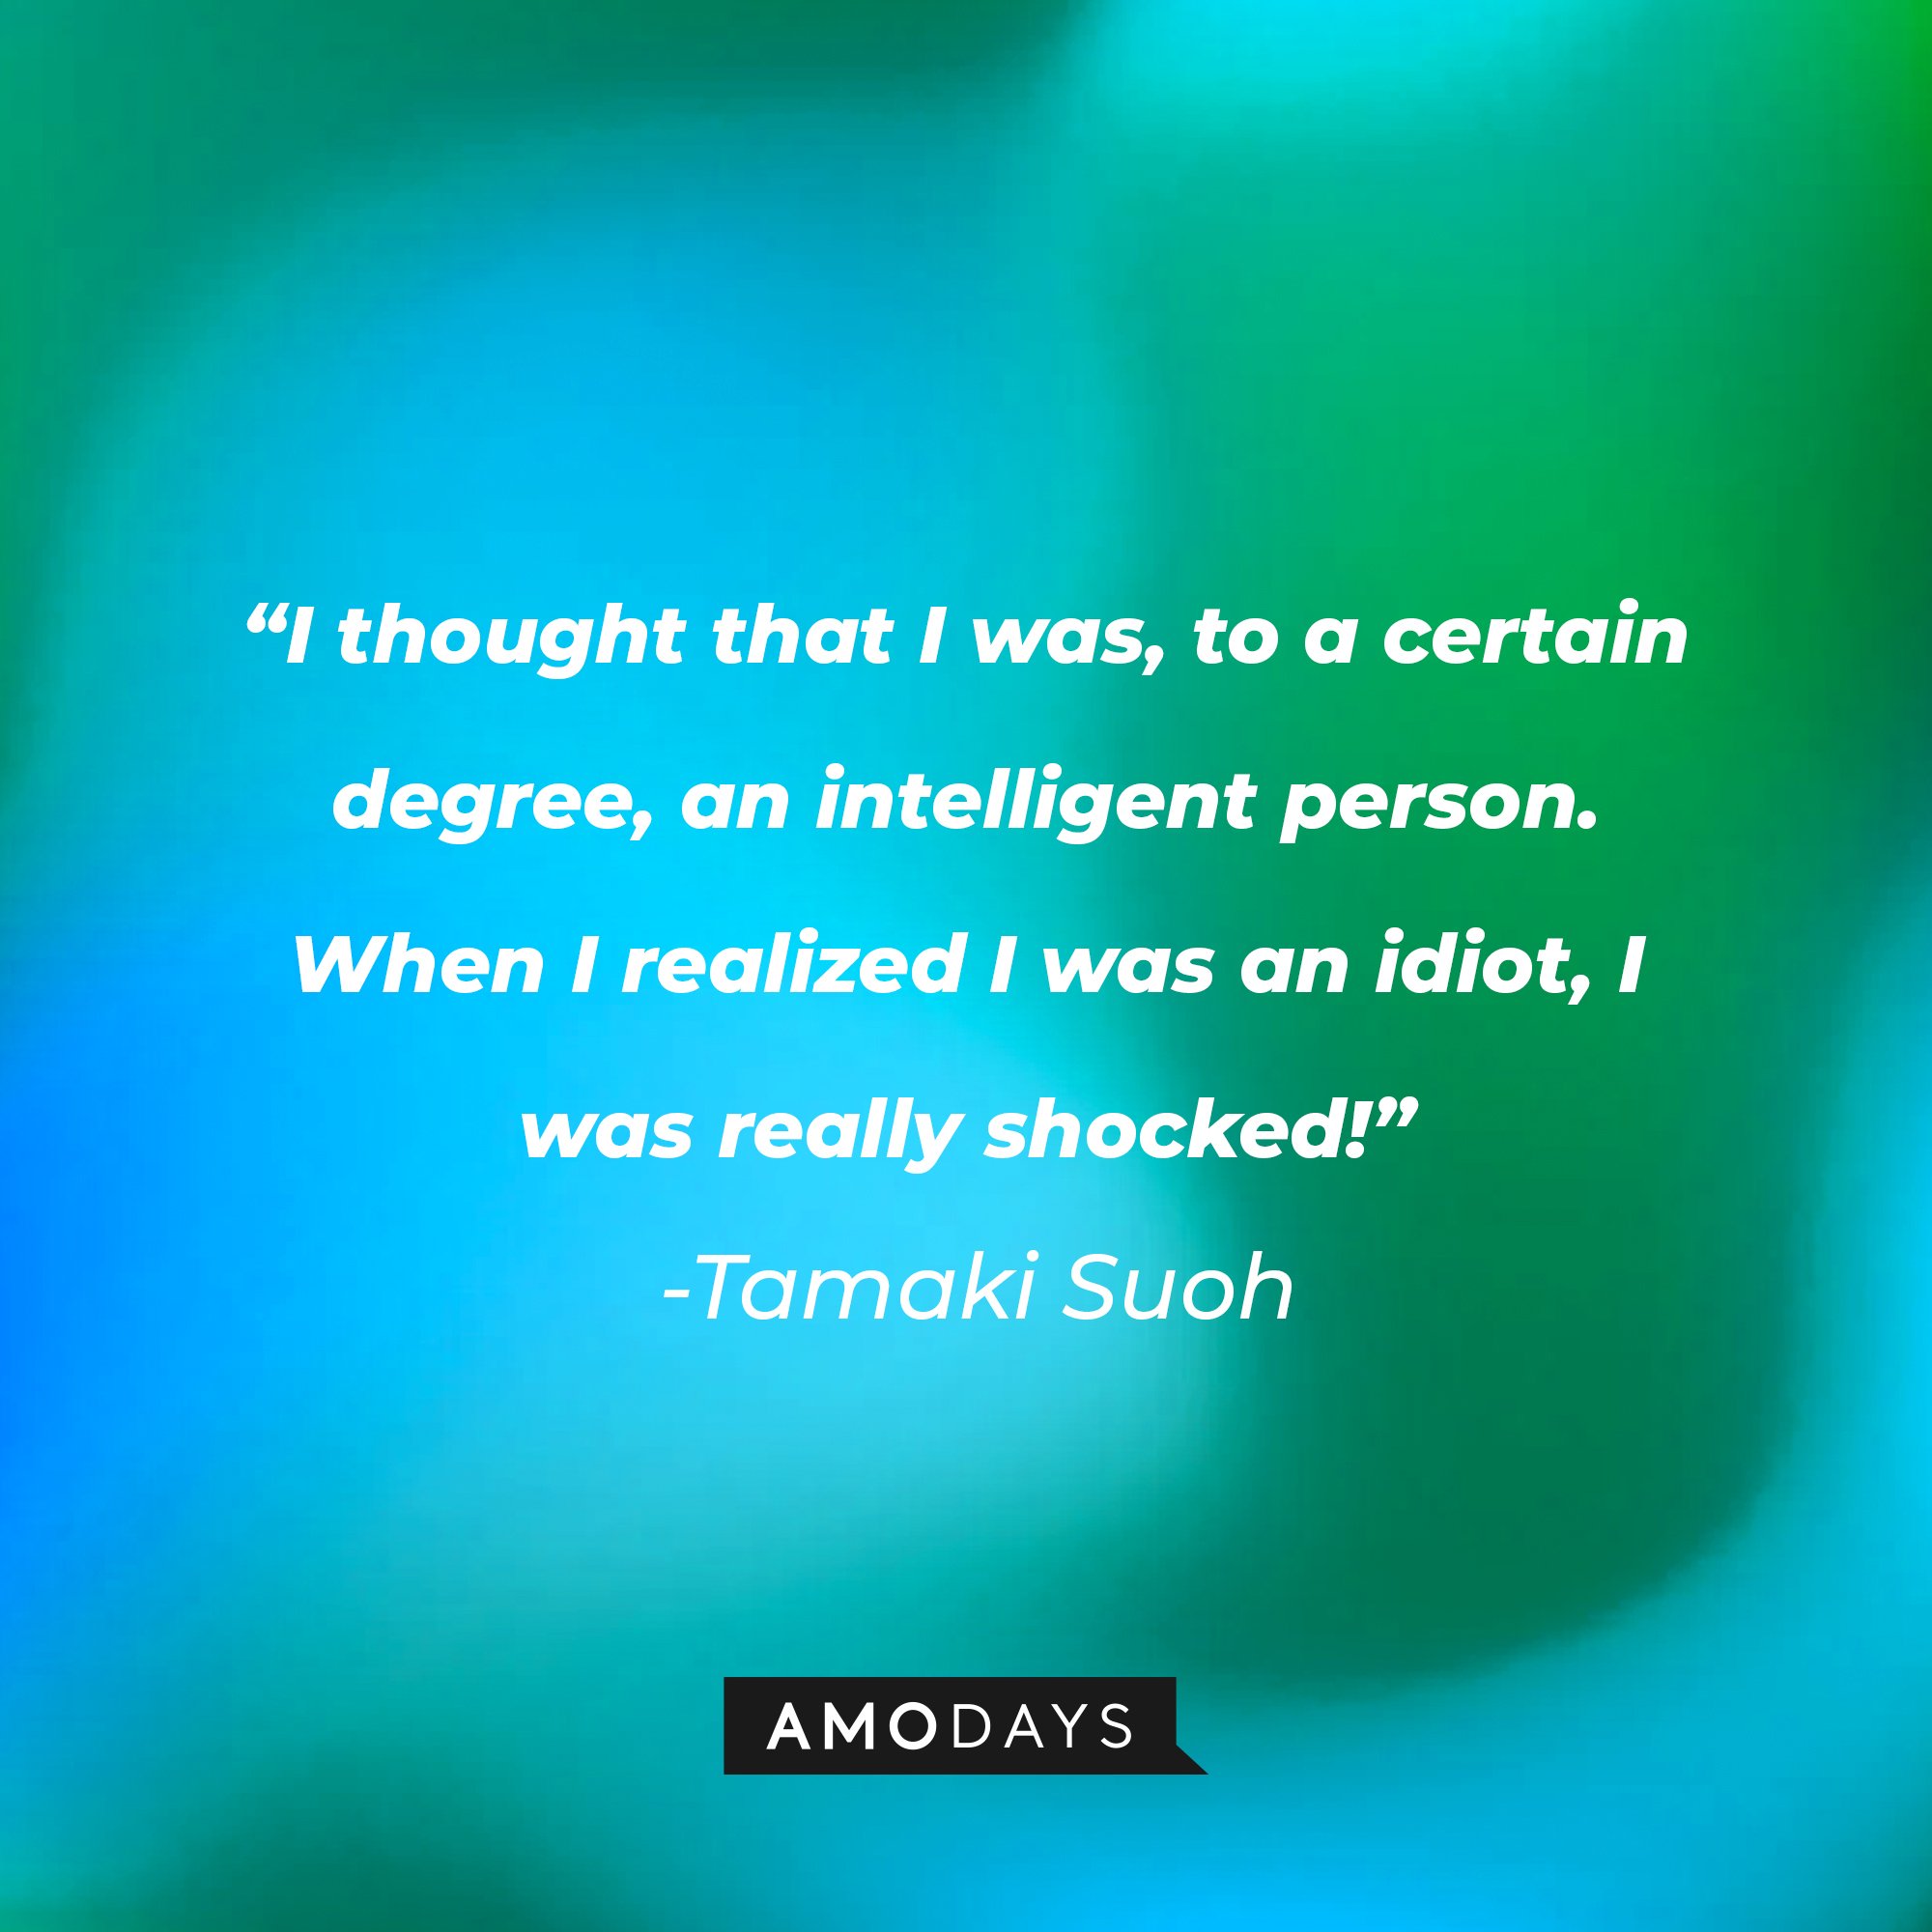 Tamaki Suoh’s quote: "I thought that I was, to a certain degree, an intelligent person. When I realized I was an idiot, I was really shocked!" | Image: AmoDays